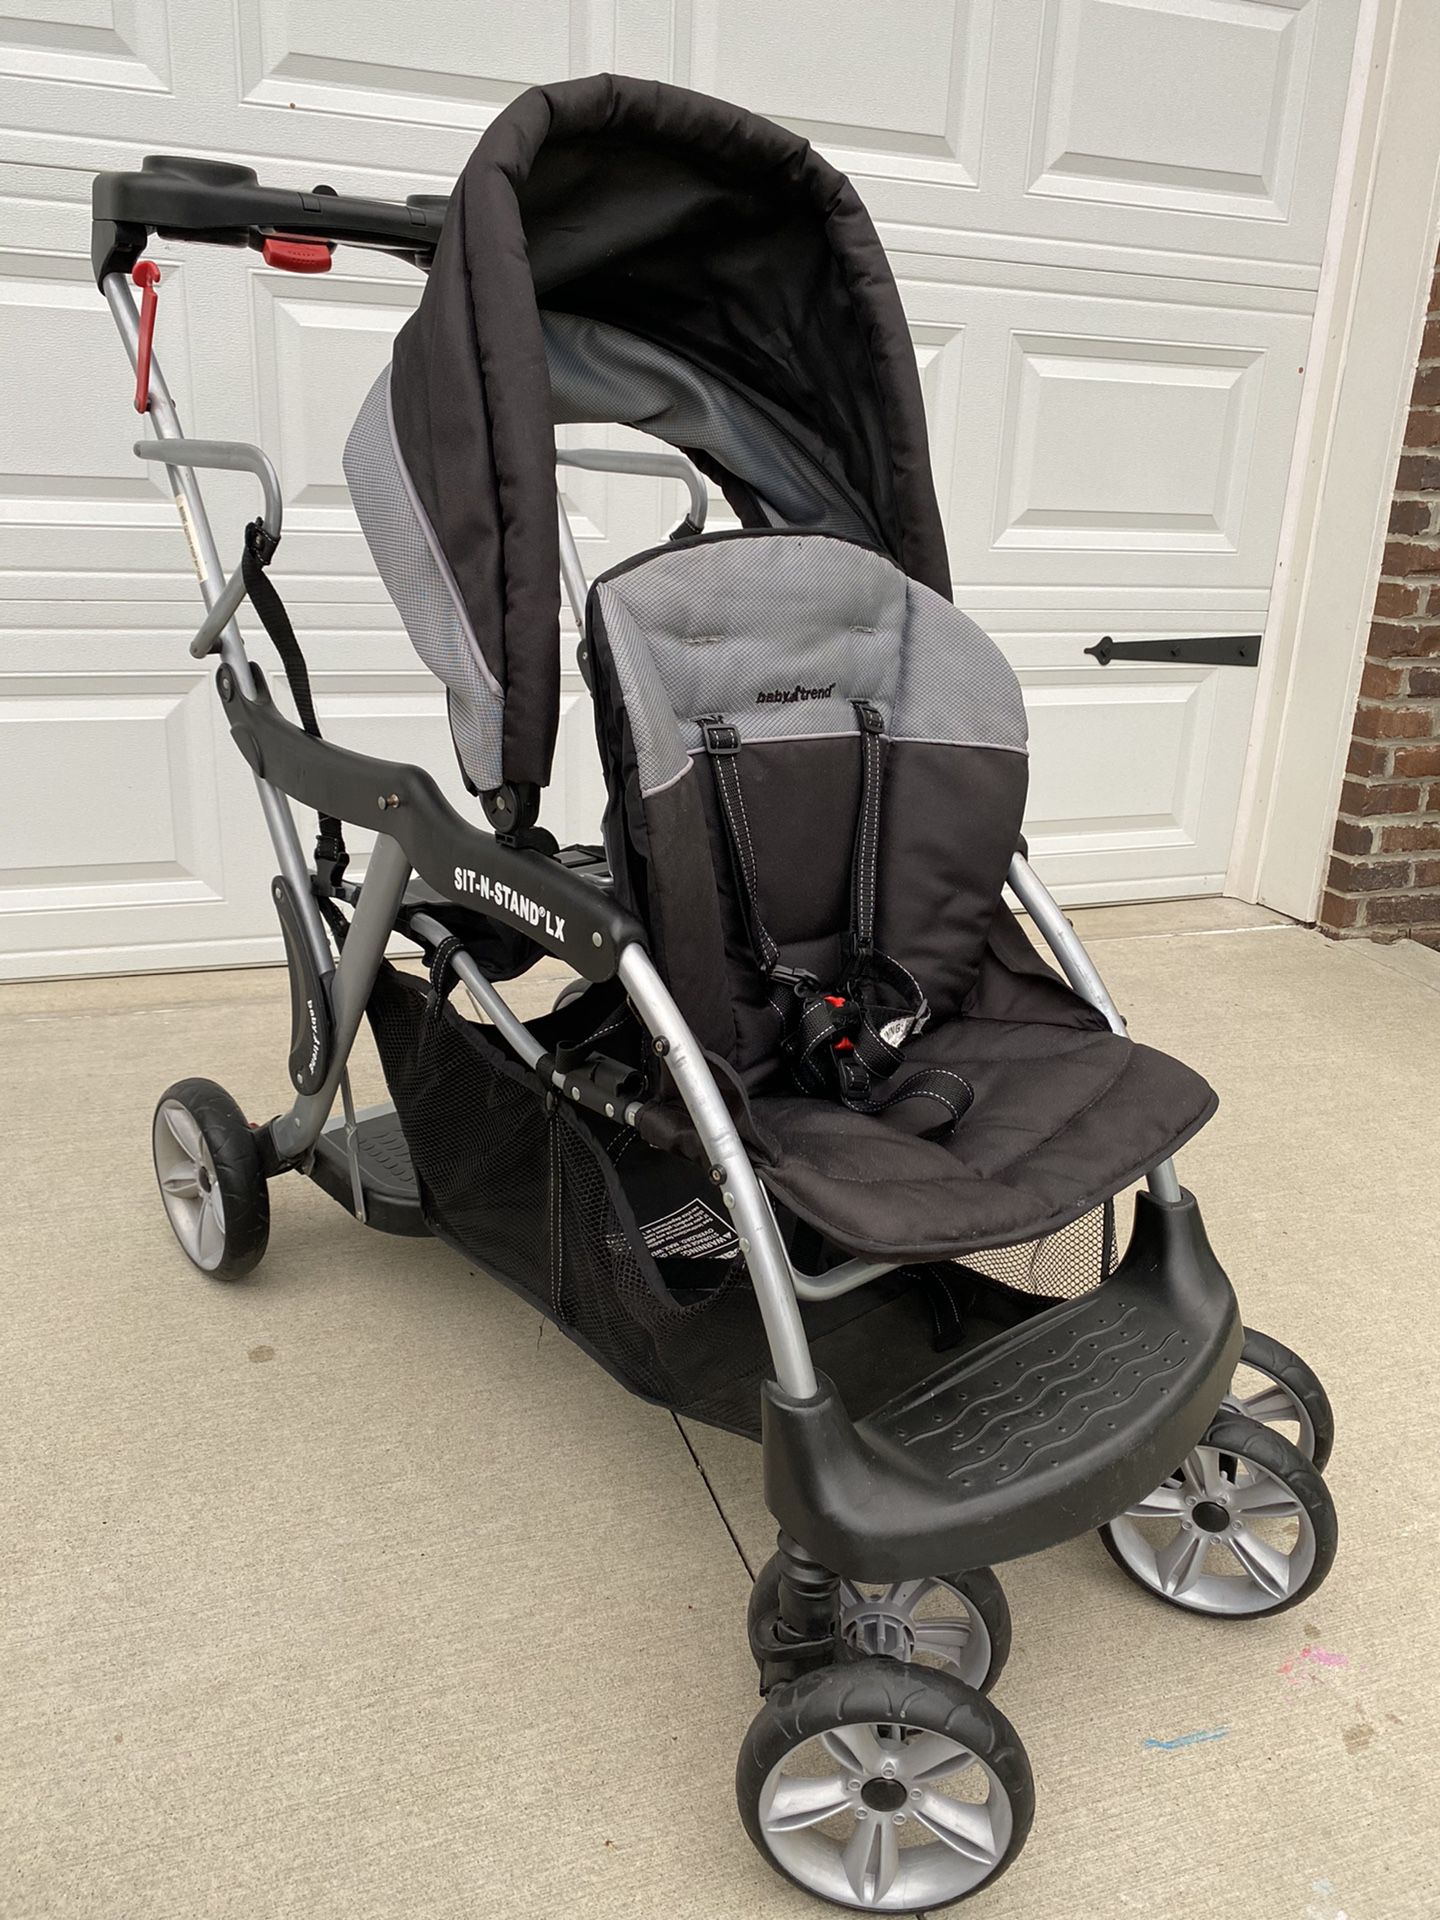 Graco Stand and Ride Stroller | Lightweight Double Stroller with Toddler Standing Platform